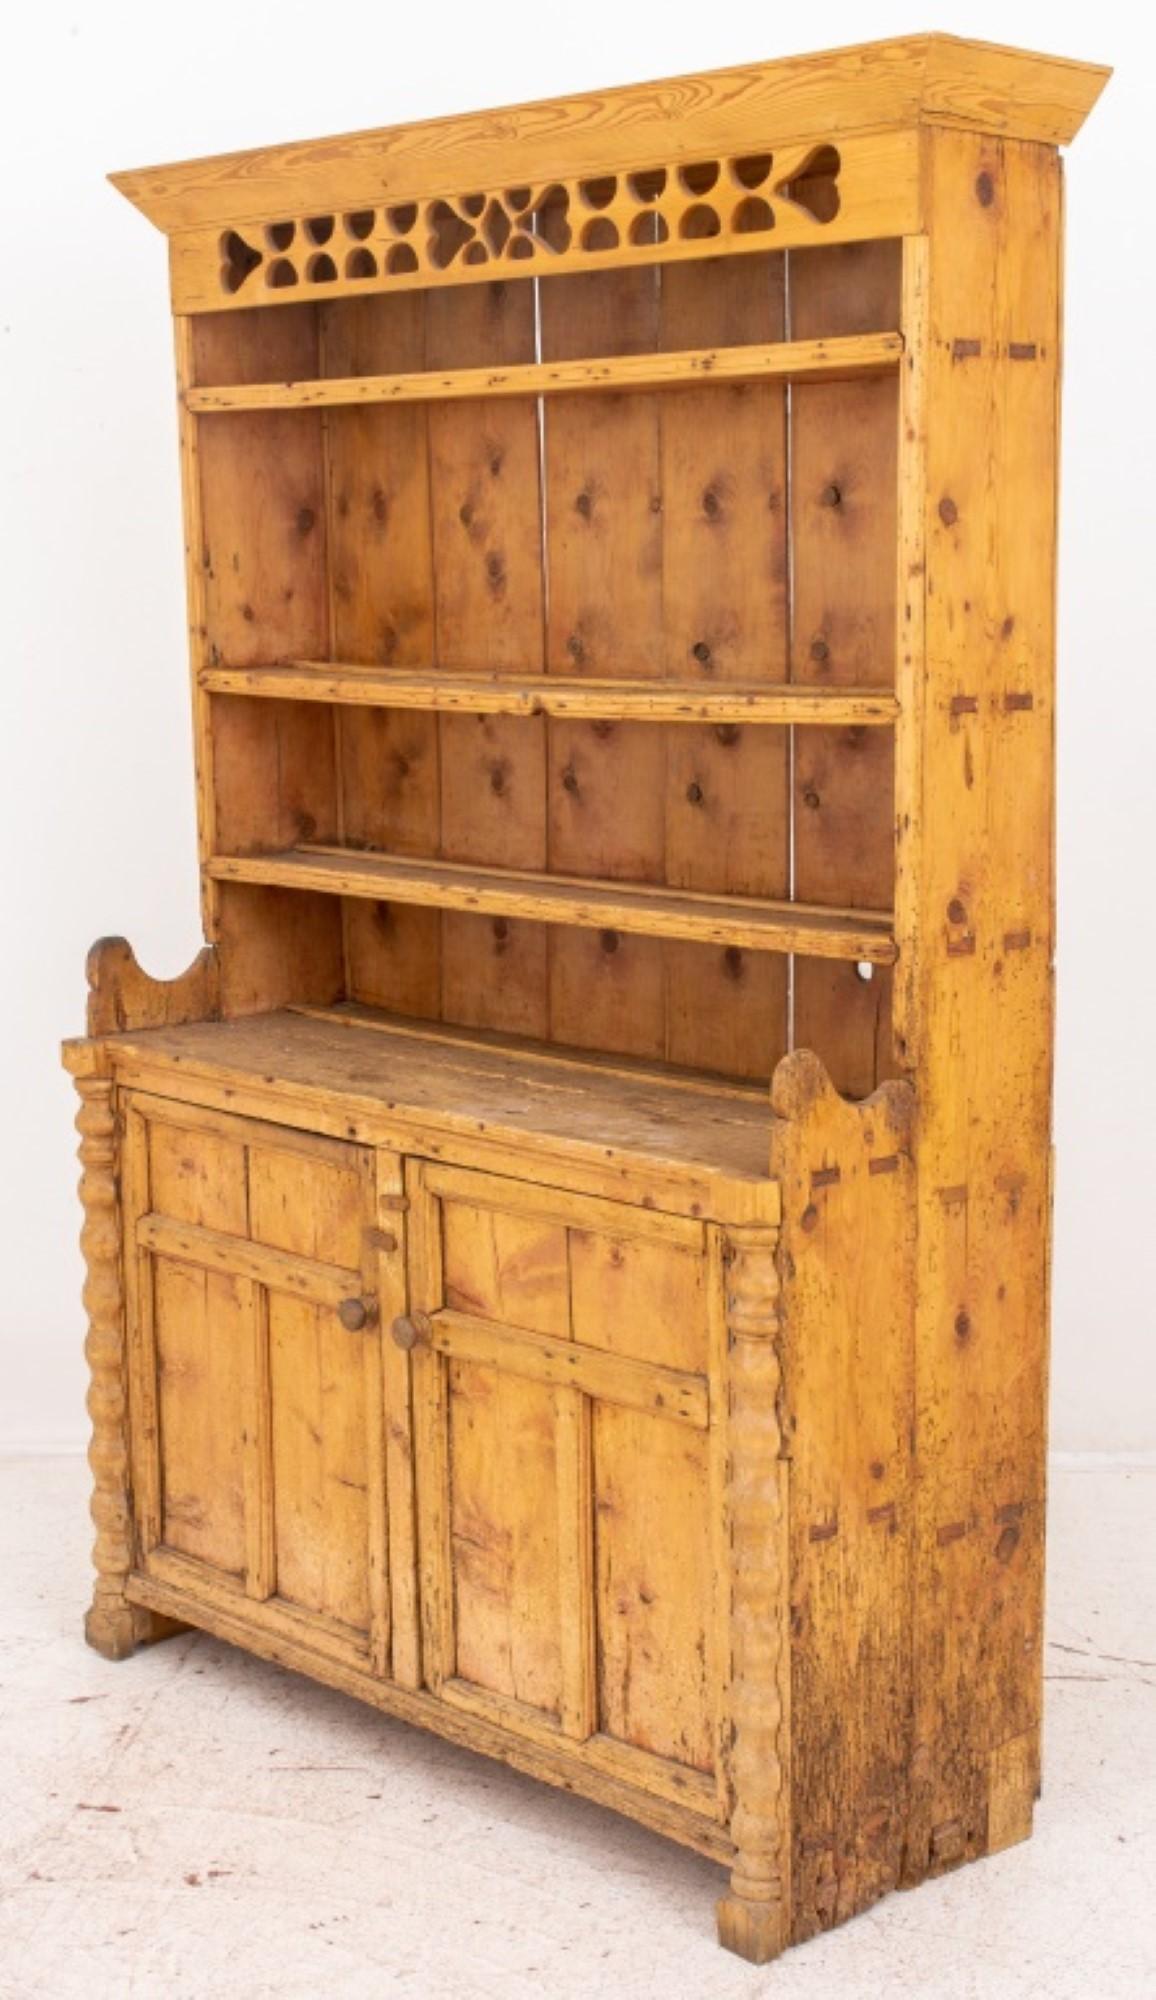 Scandinavian Provincial Style Pine Cabinet and Hutch, made of reclaimed antique pine, with cornice above a reticulated frieze, the hutch with three shelves above a two-door cabinet. Provenance: Property from a Fifth Avenue duplex. 

Dealer: S138XX

